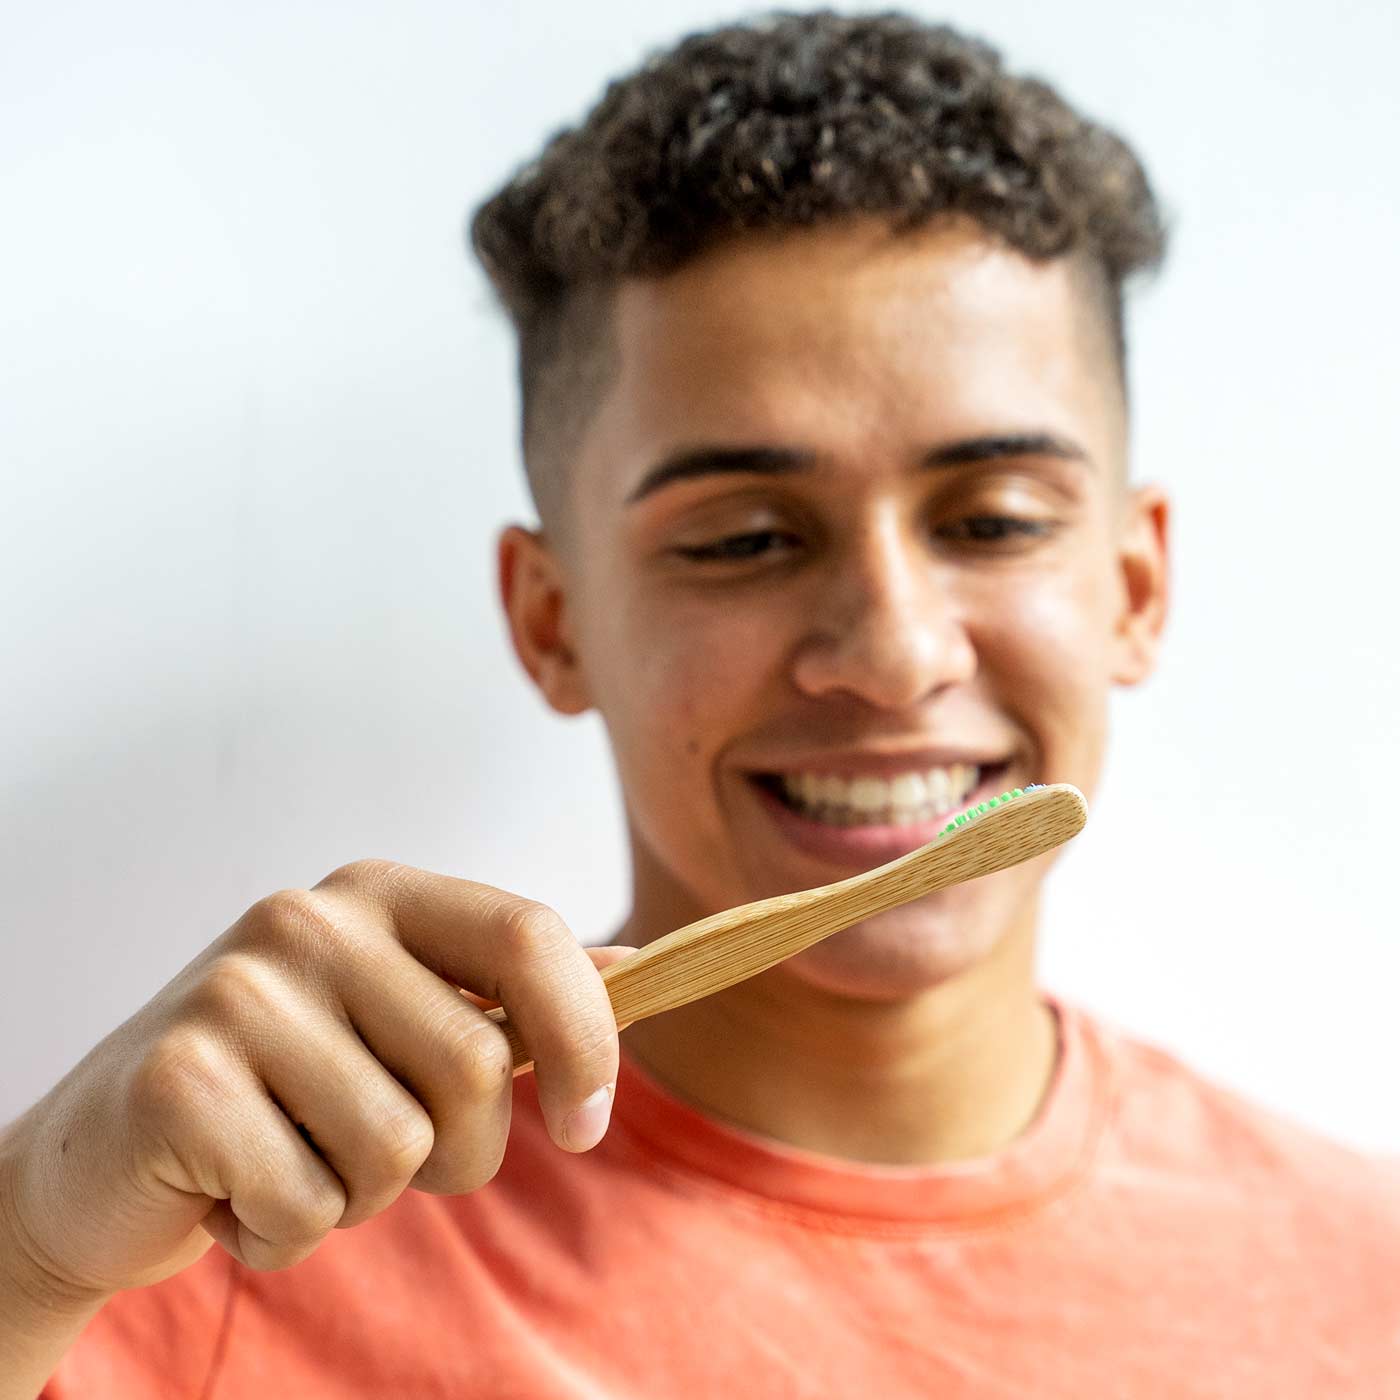 smiling young man holding oxyfresh bamboo toothbrush